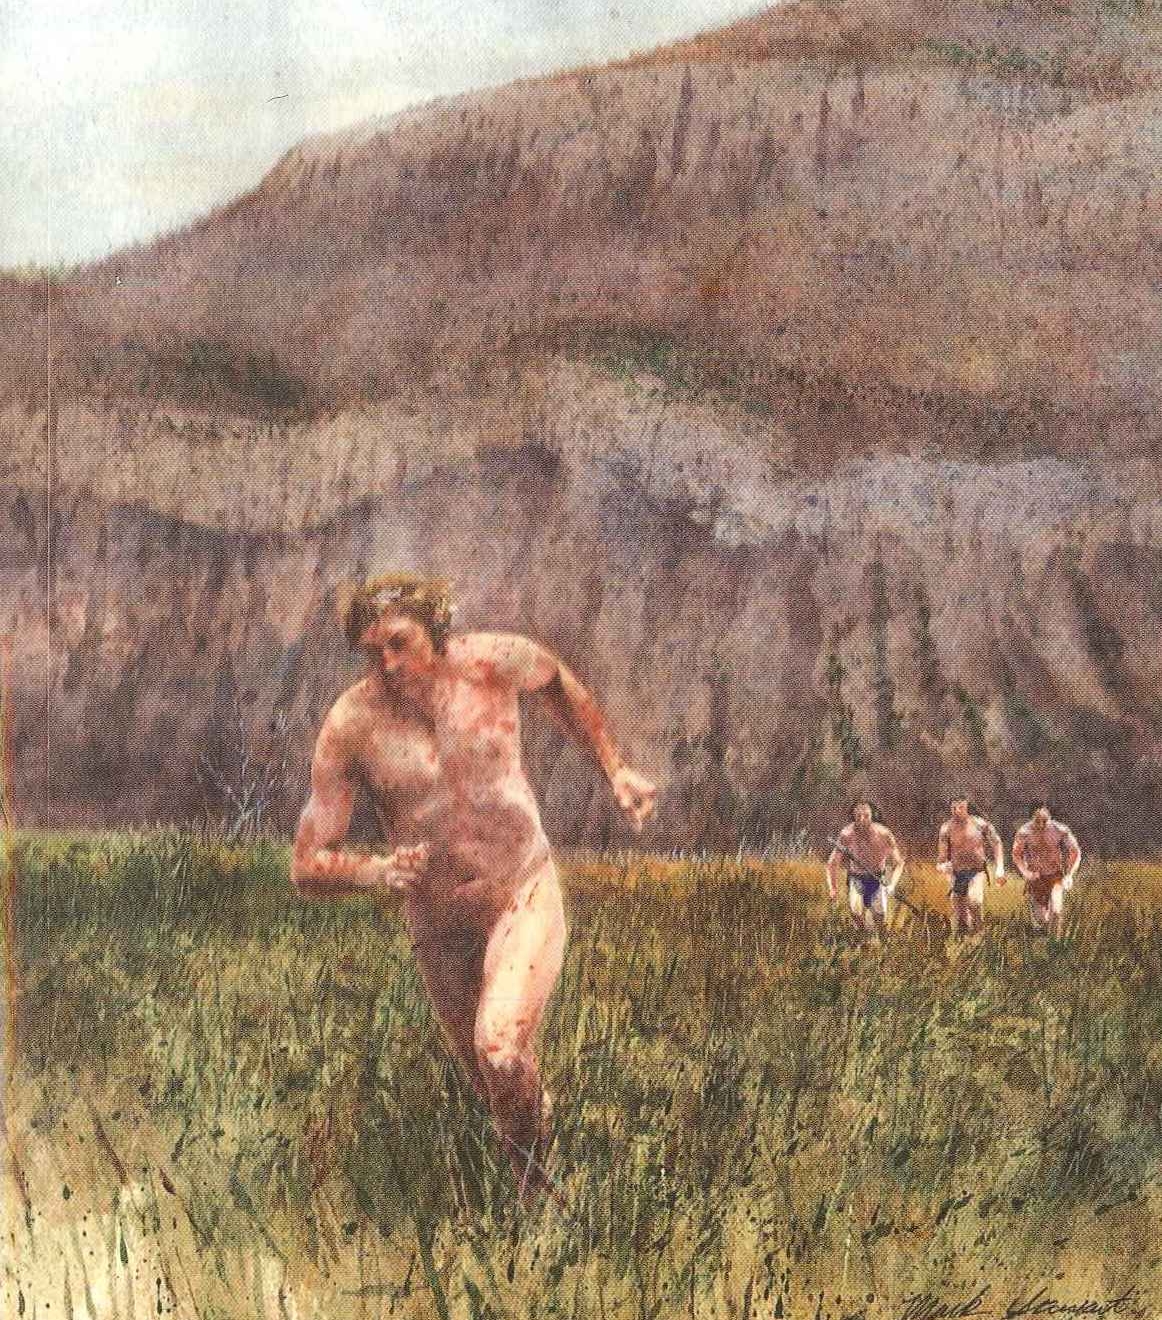 John Colter 1808 captured by blackfeet indians and stripped naked he becomes the subject of a manhunt and manages to escape.